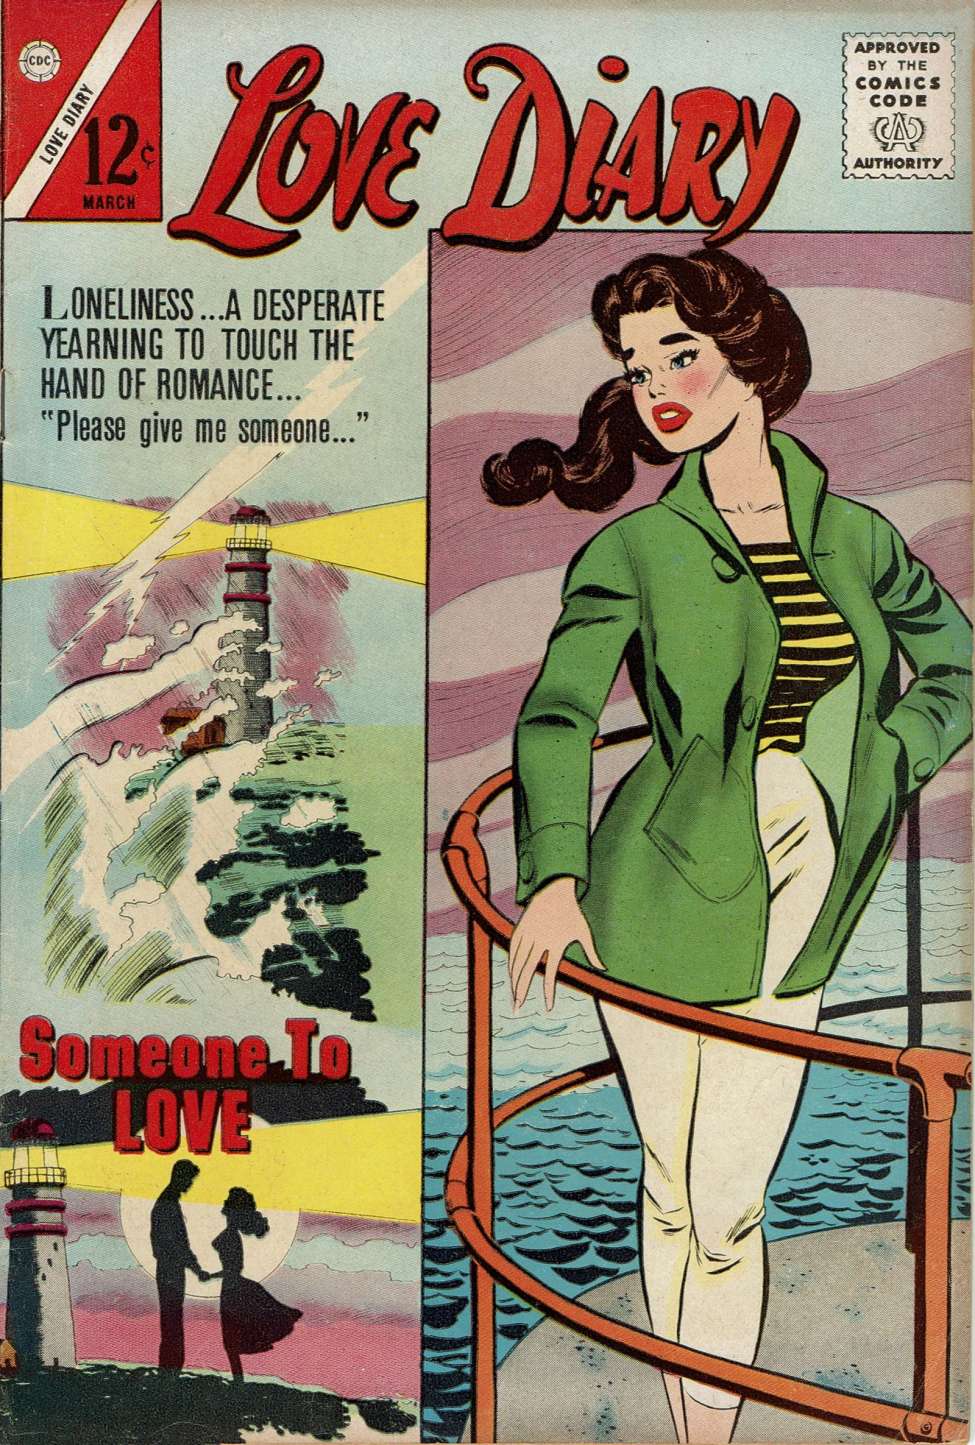 Comic Book Cover For Love Diary 26